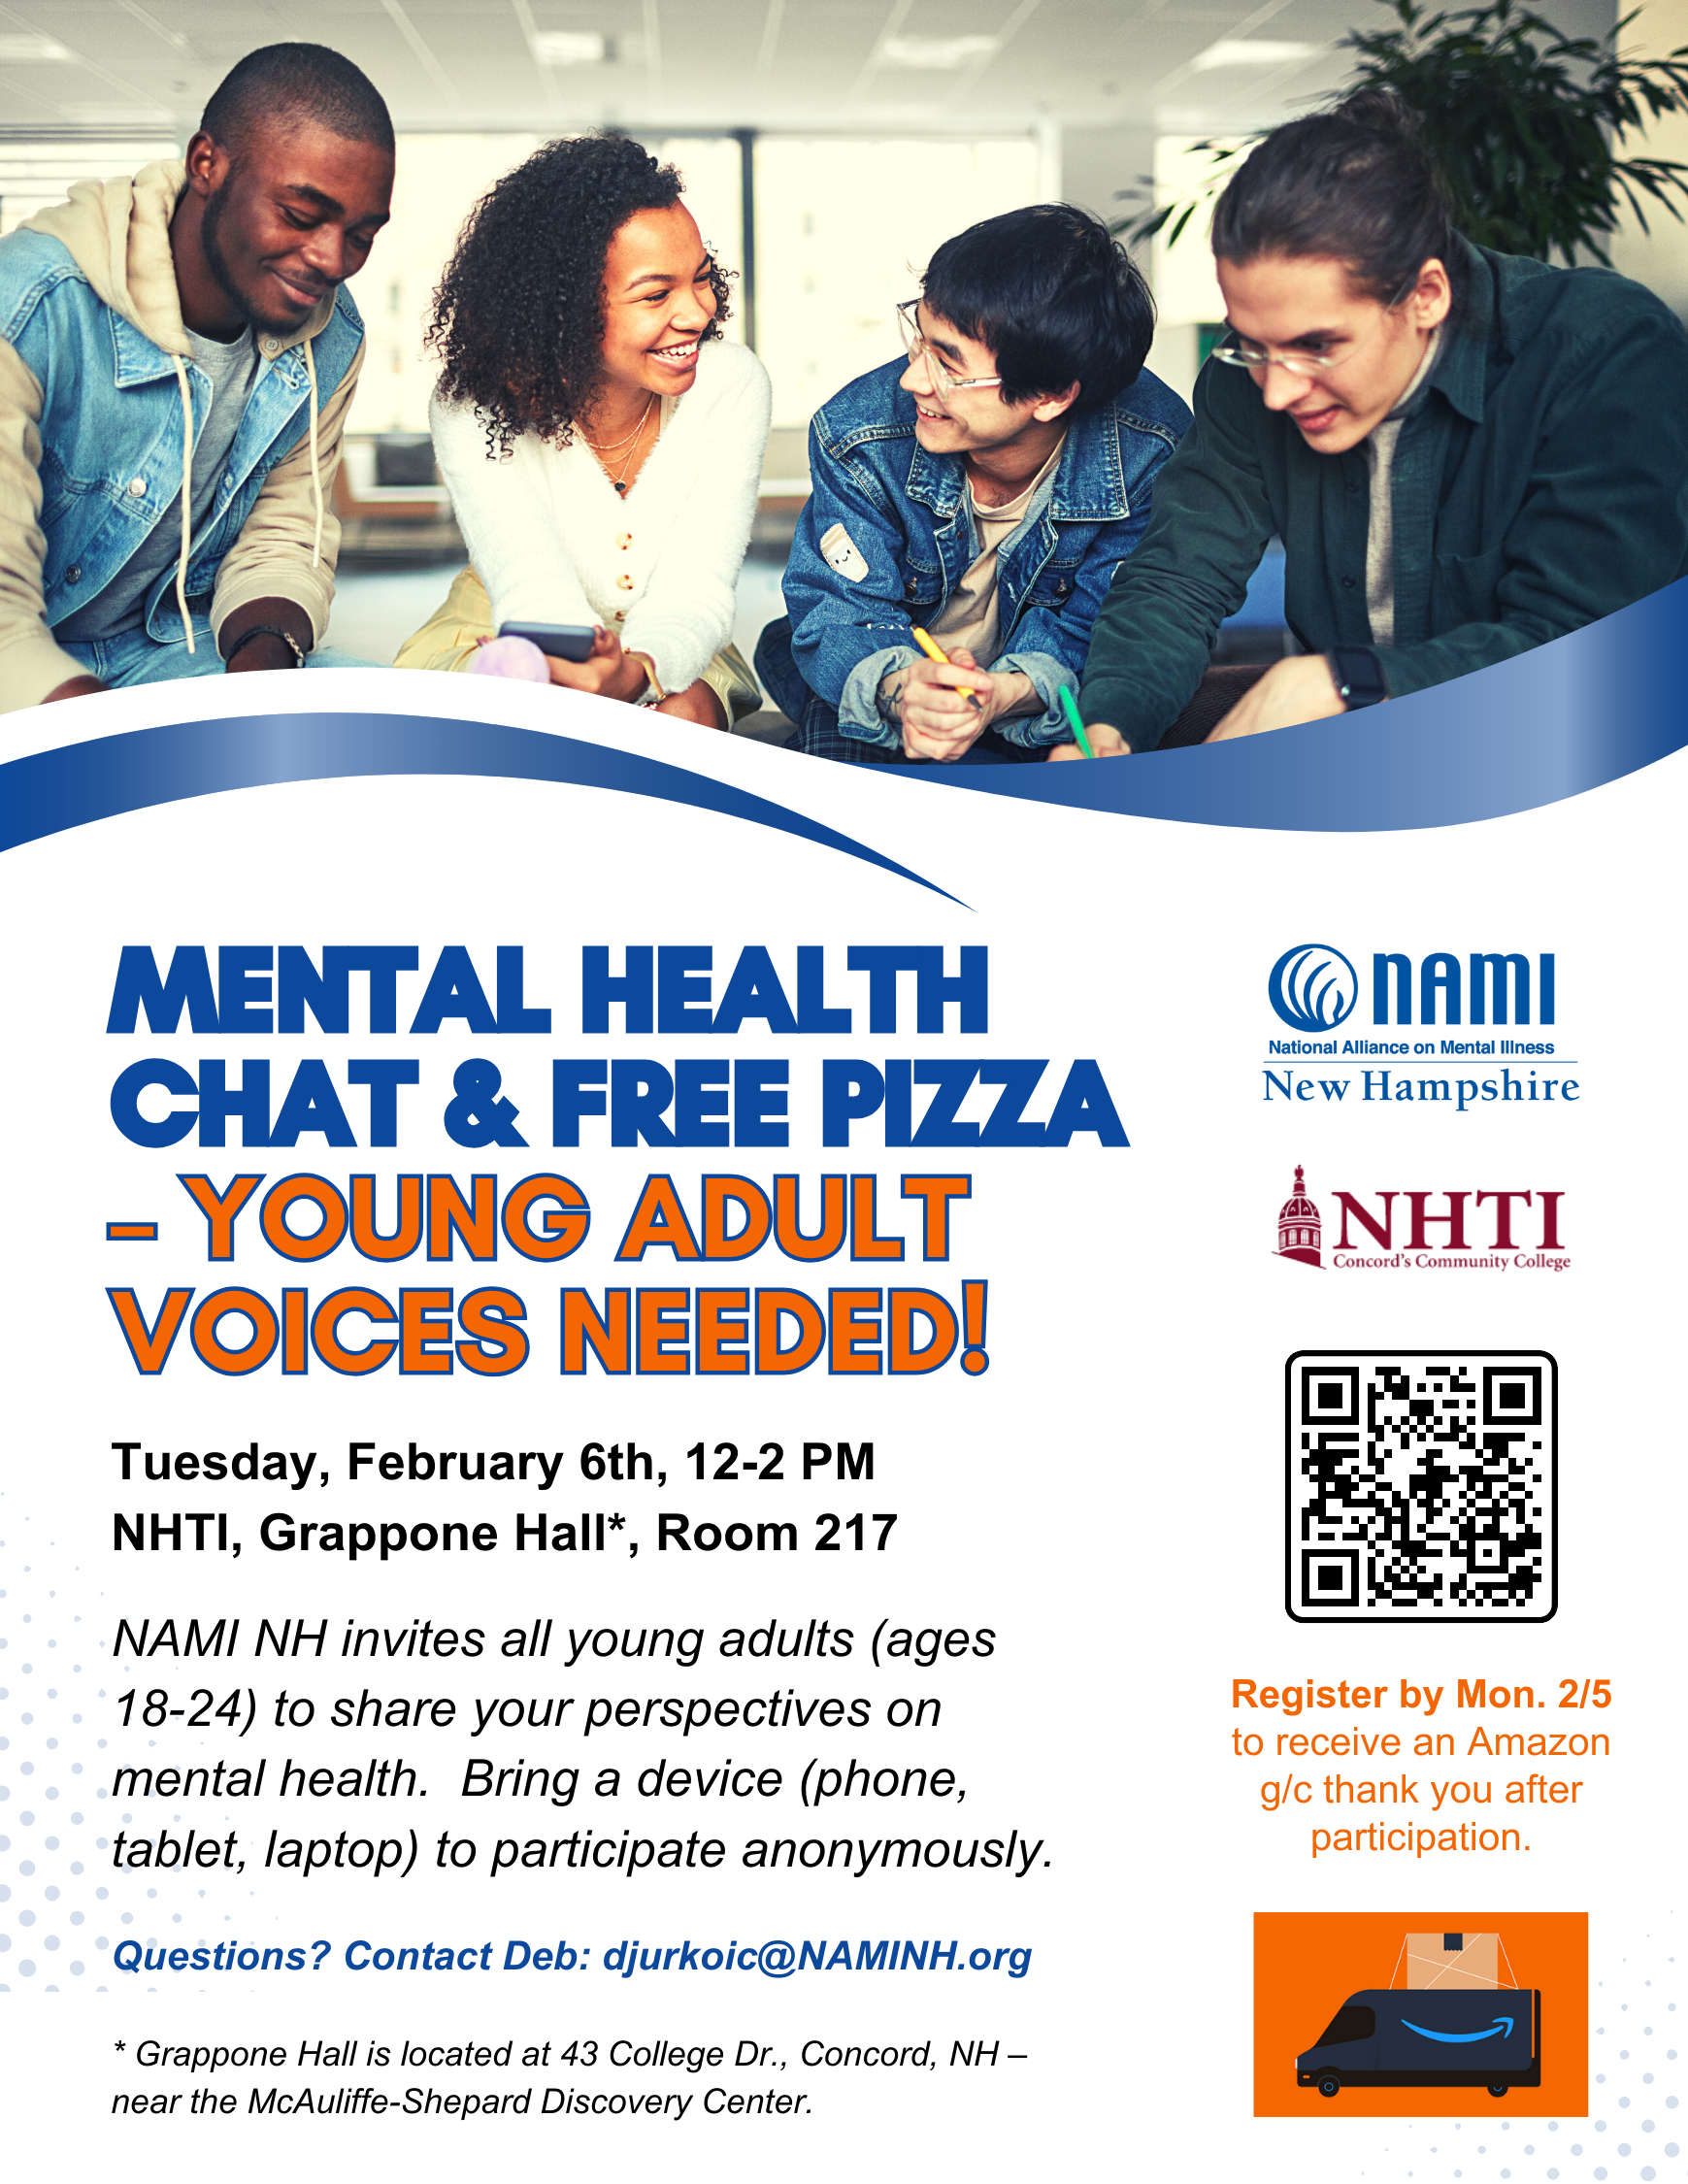 Mental Health Chat & Free Pizza - Young Adult Voices Needed!